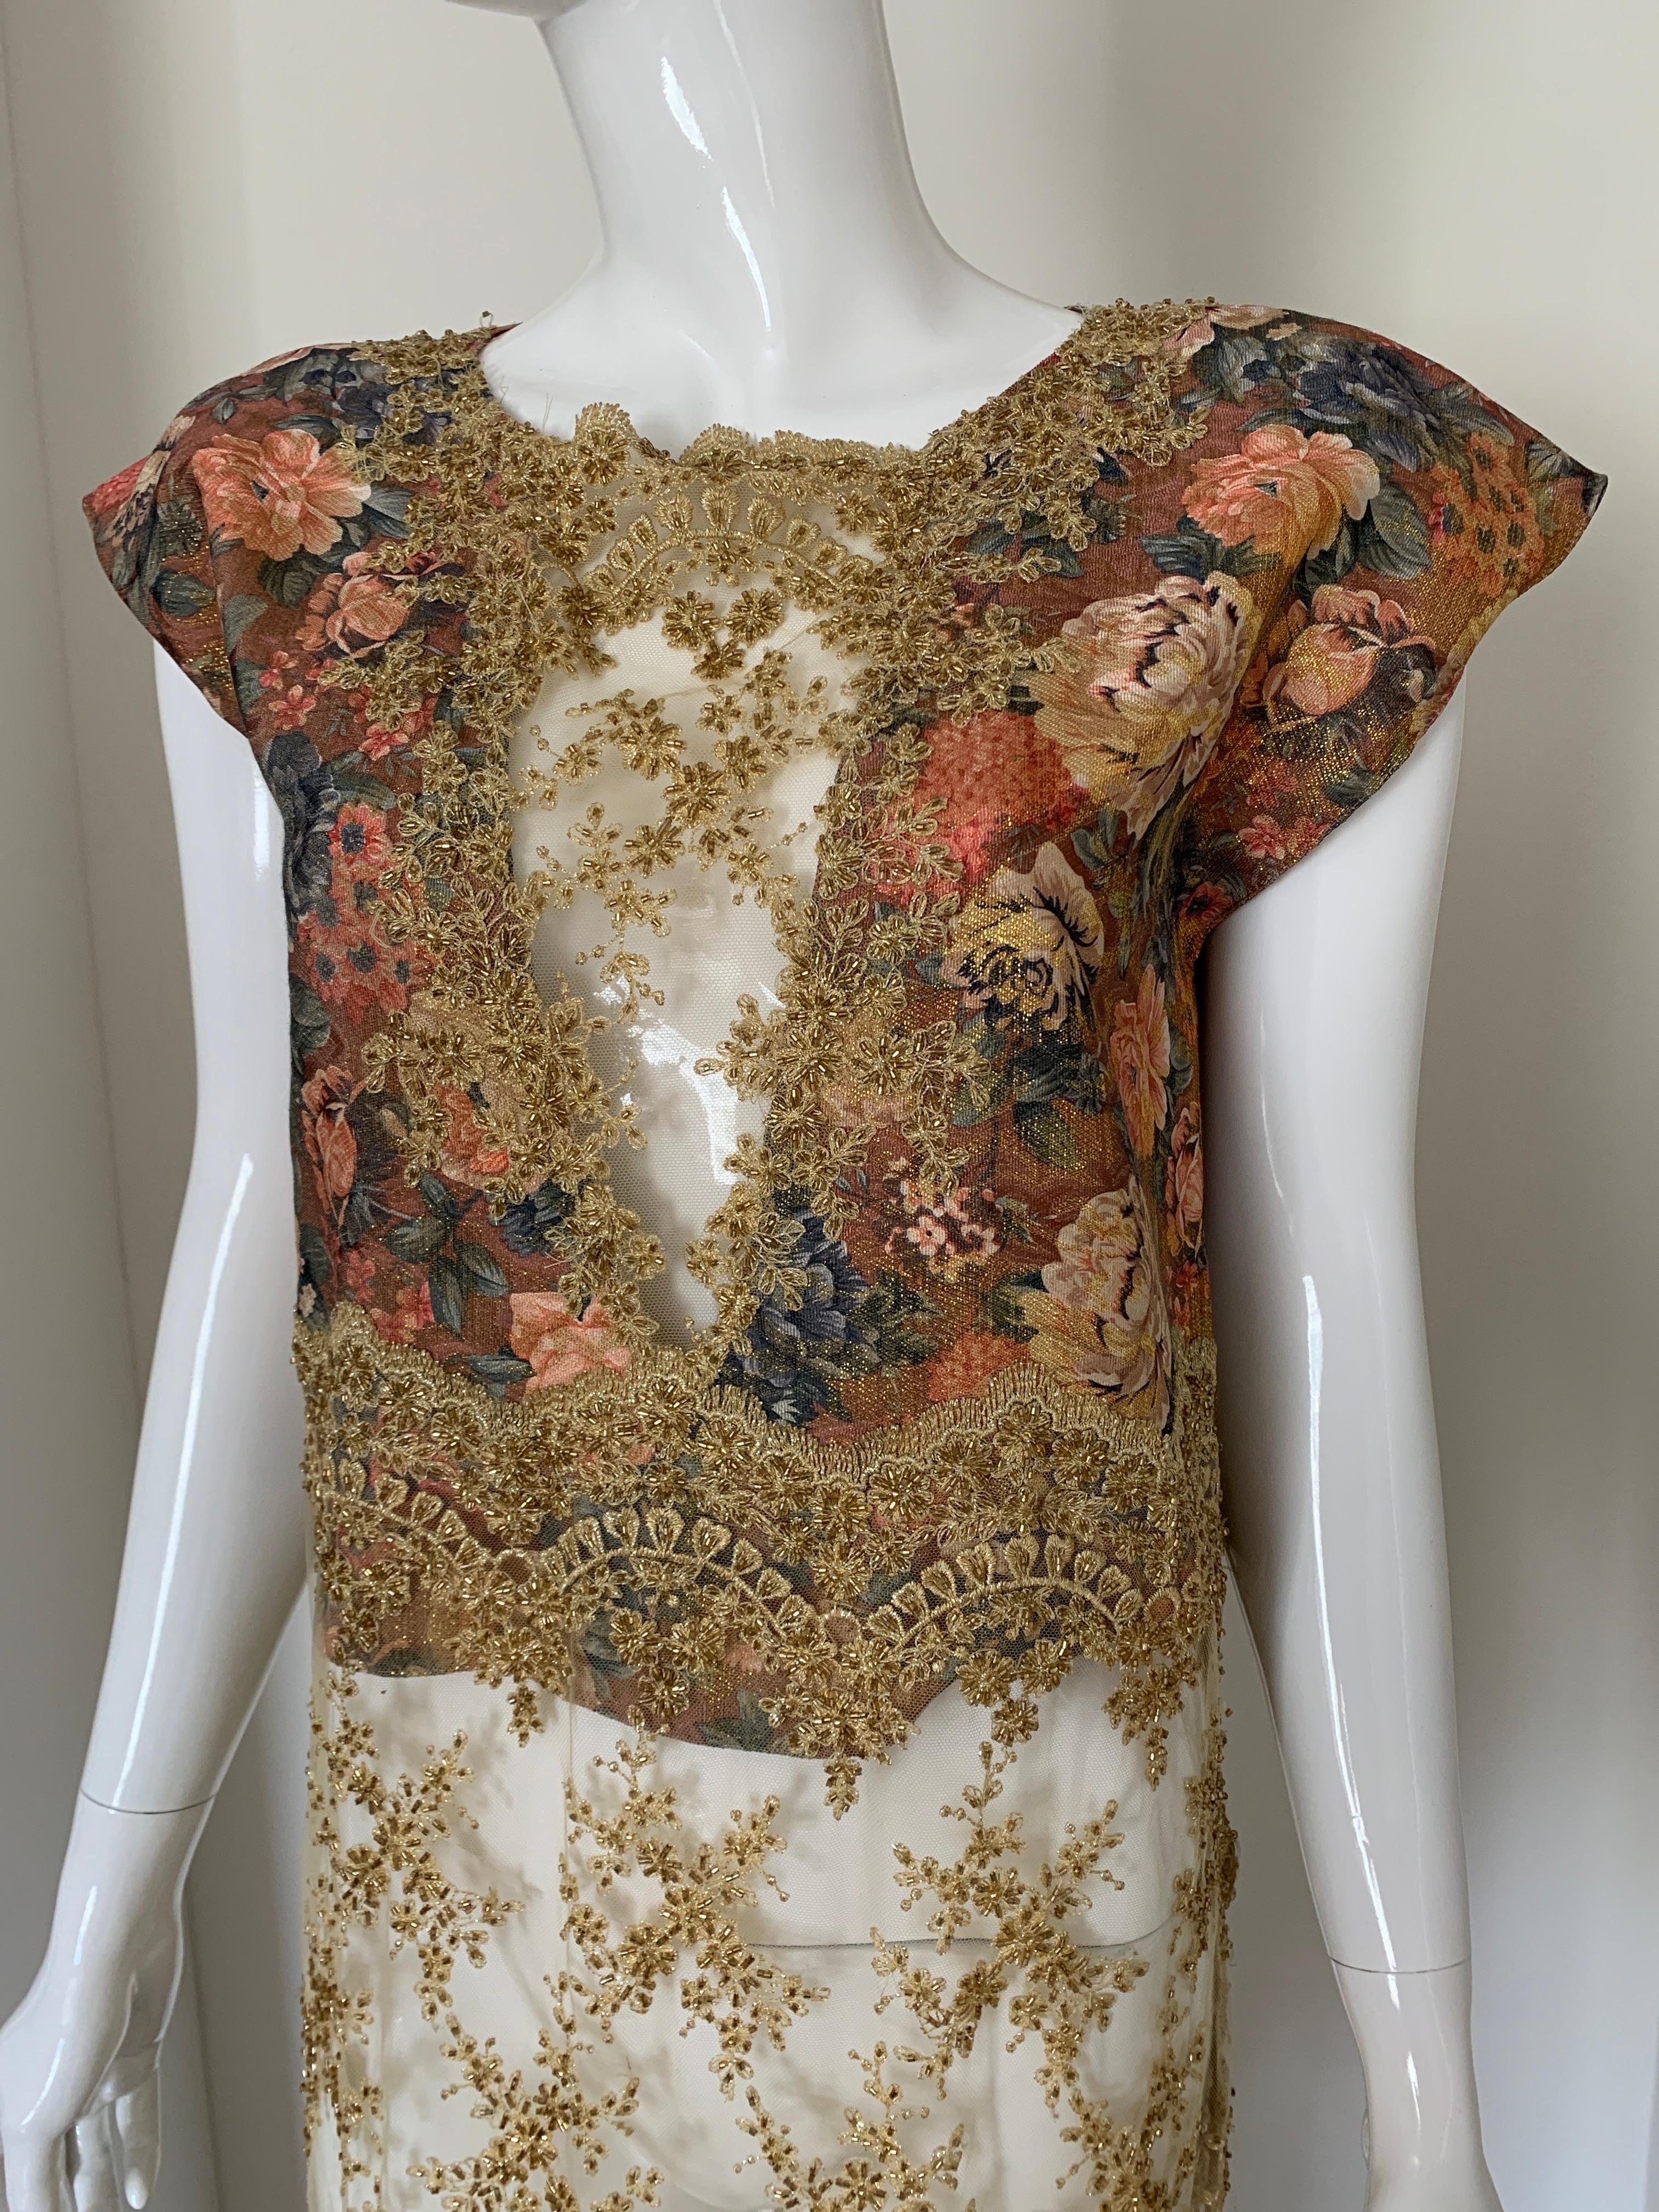 Vintage Handmade Gold Applique and Floral Gown 
A very special piece! Comes with matching handmade headband. 
Sheer on bottom and V neck middle part. Size not marked - size US M 
Slips easily overhead. 
One of a kind piece 